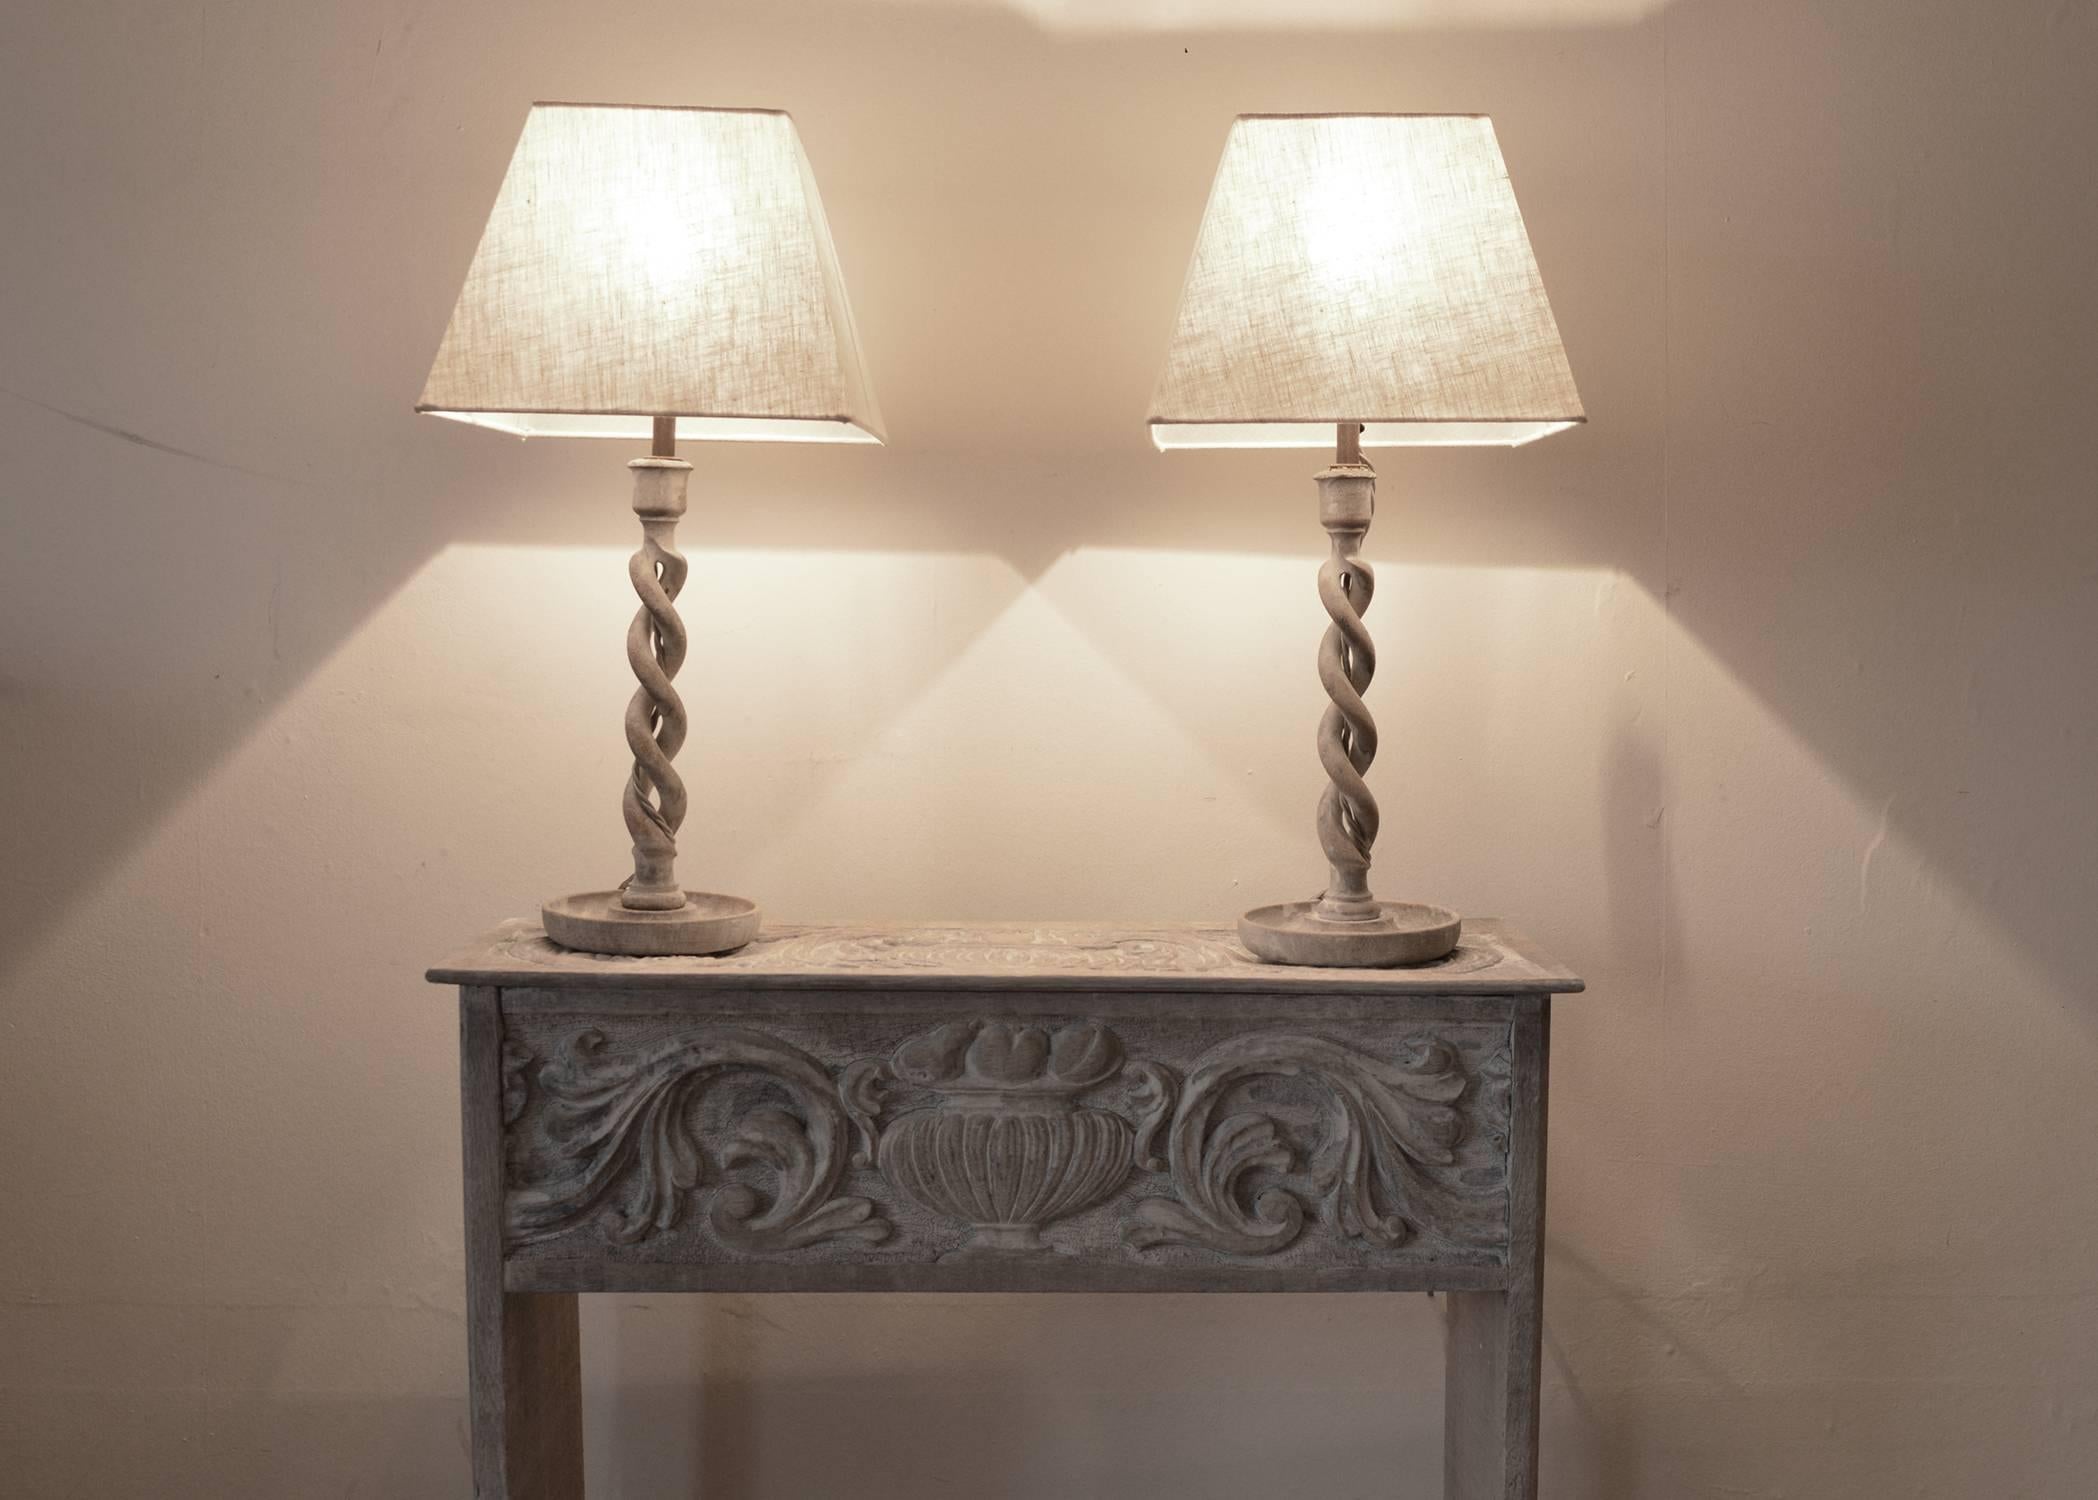 
Super pair of limed oak open twist table lamps.

The oak has been recently limed to enhance the beauty in the grain of the oak.

The shades are linen.

Professionally wired to UK standards.